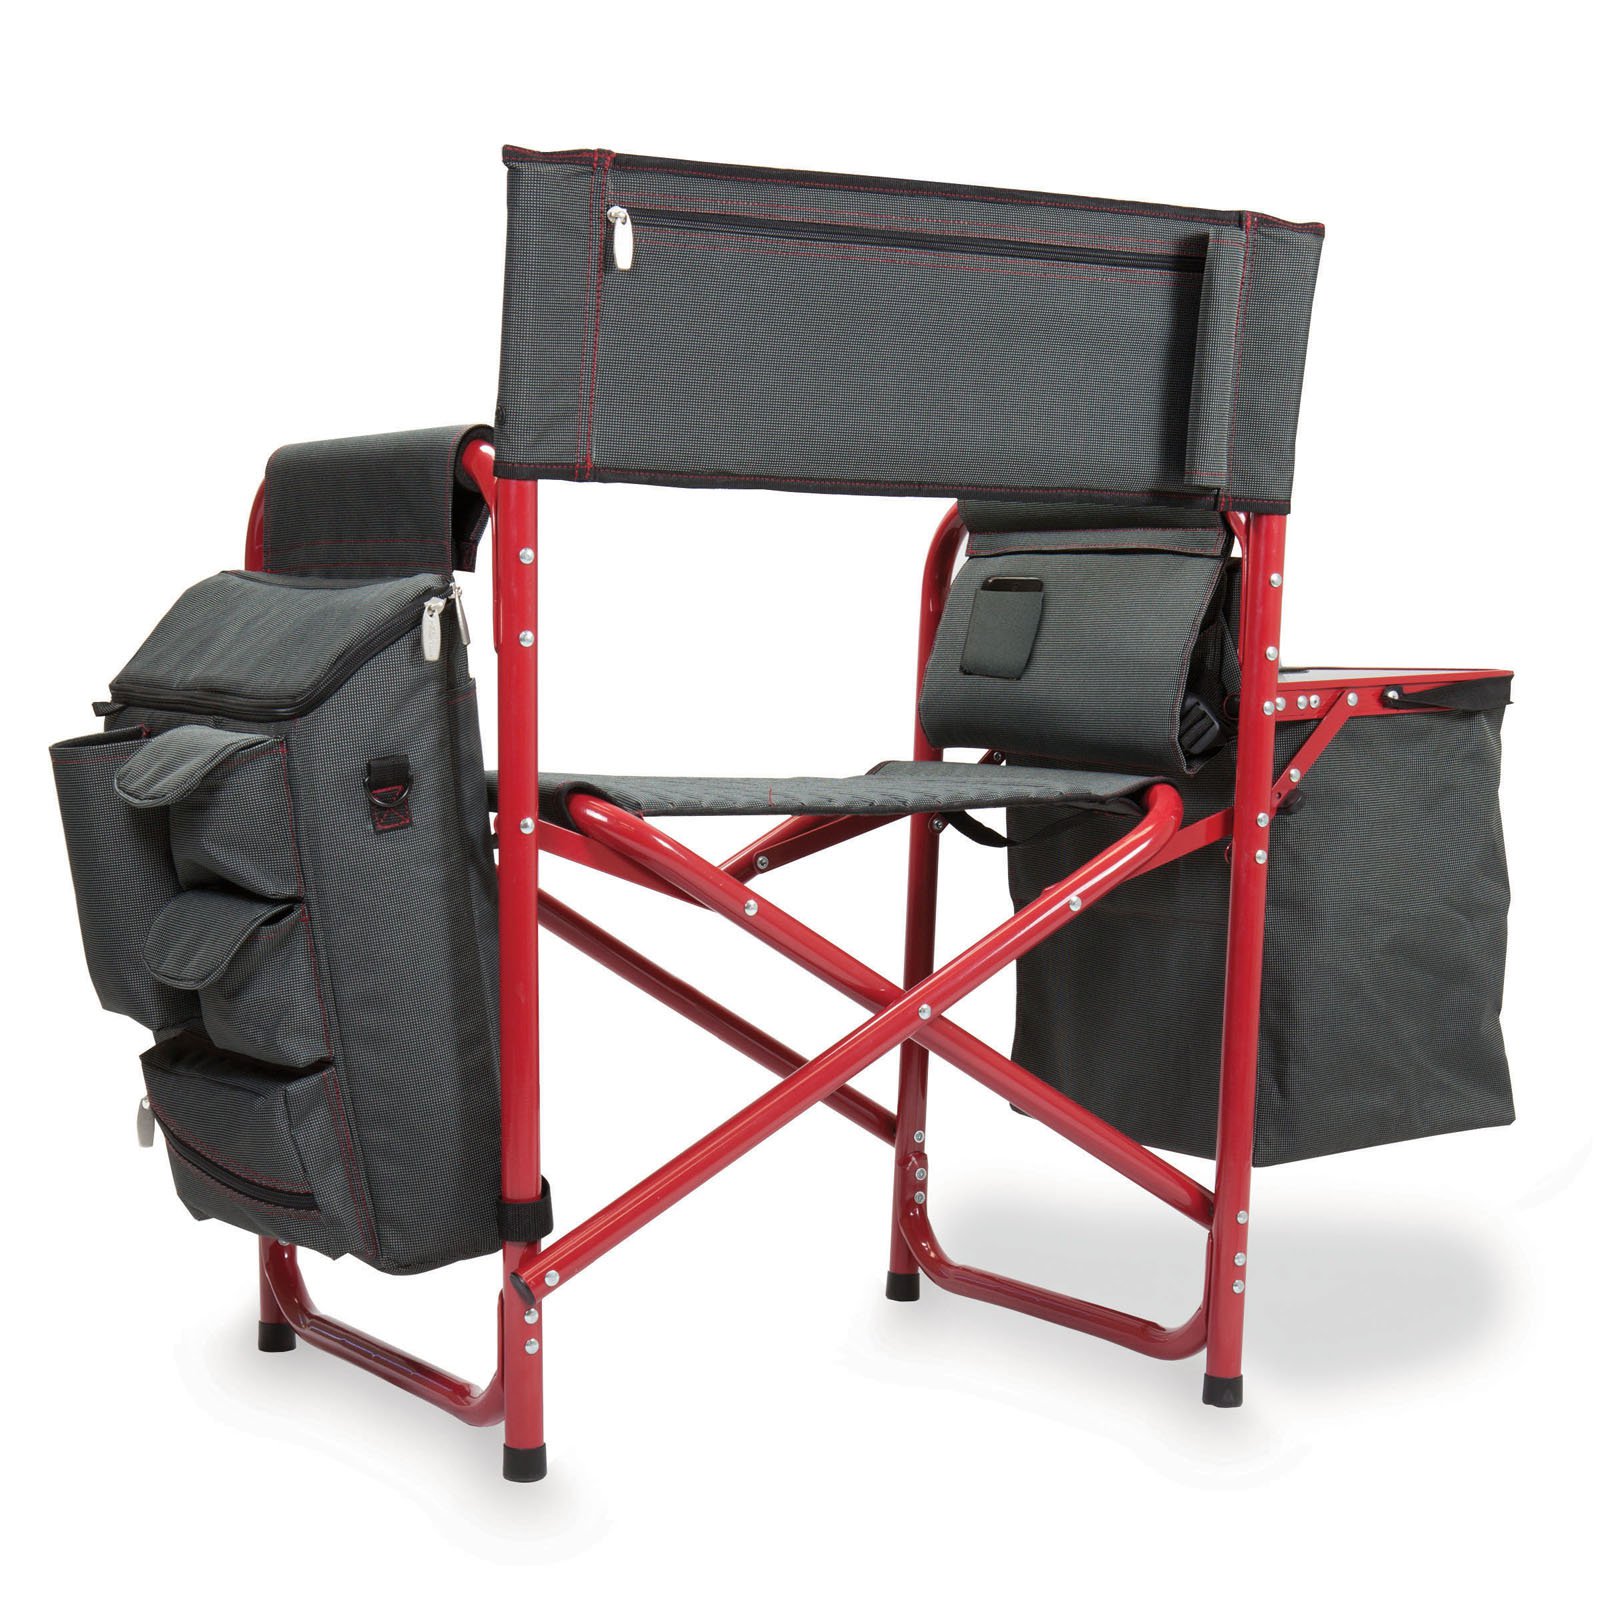 Picnic Time Fusion Directors Chair - Dark Gray with Red - image 4 of 4